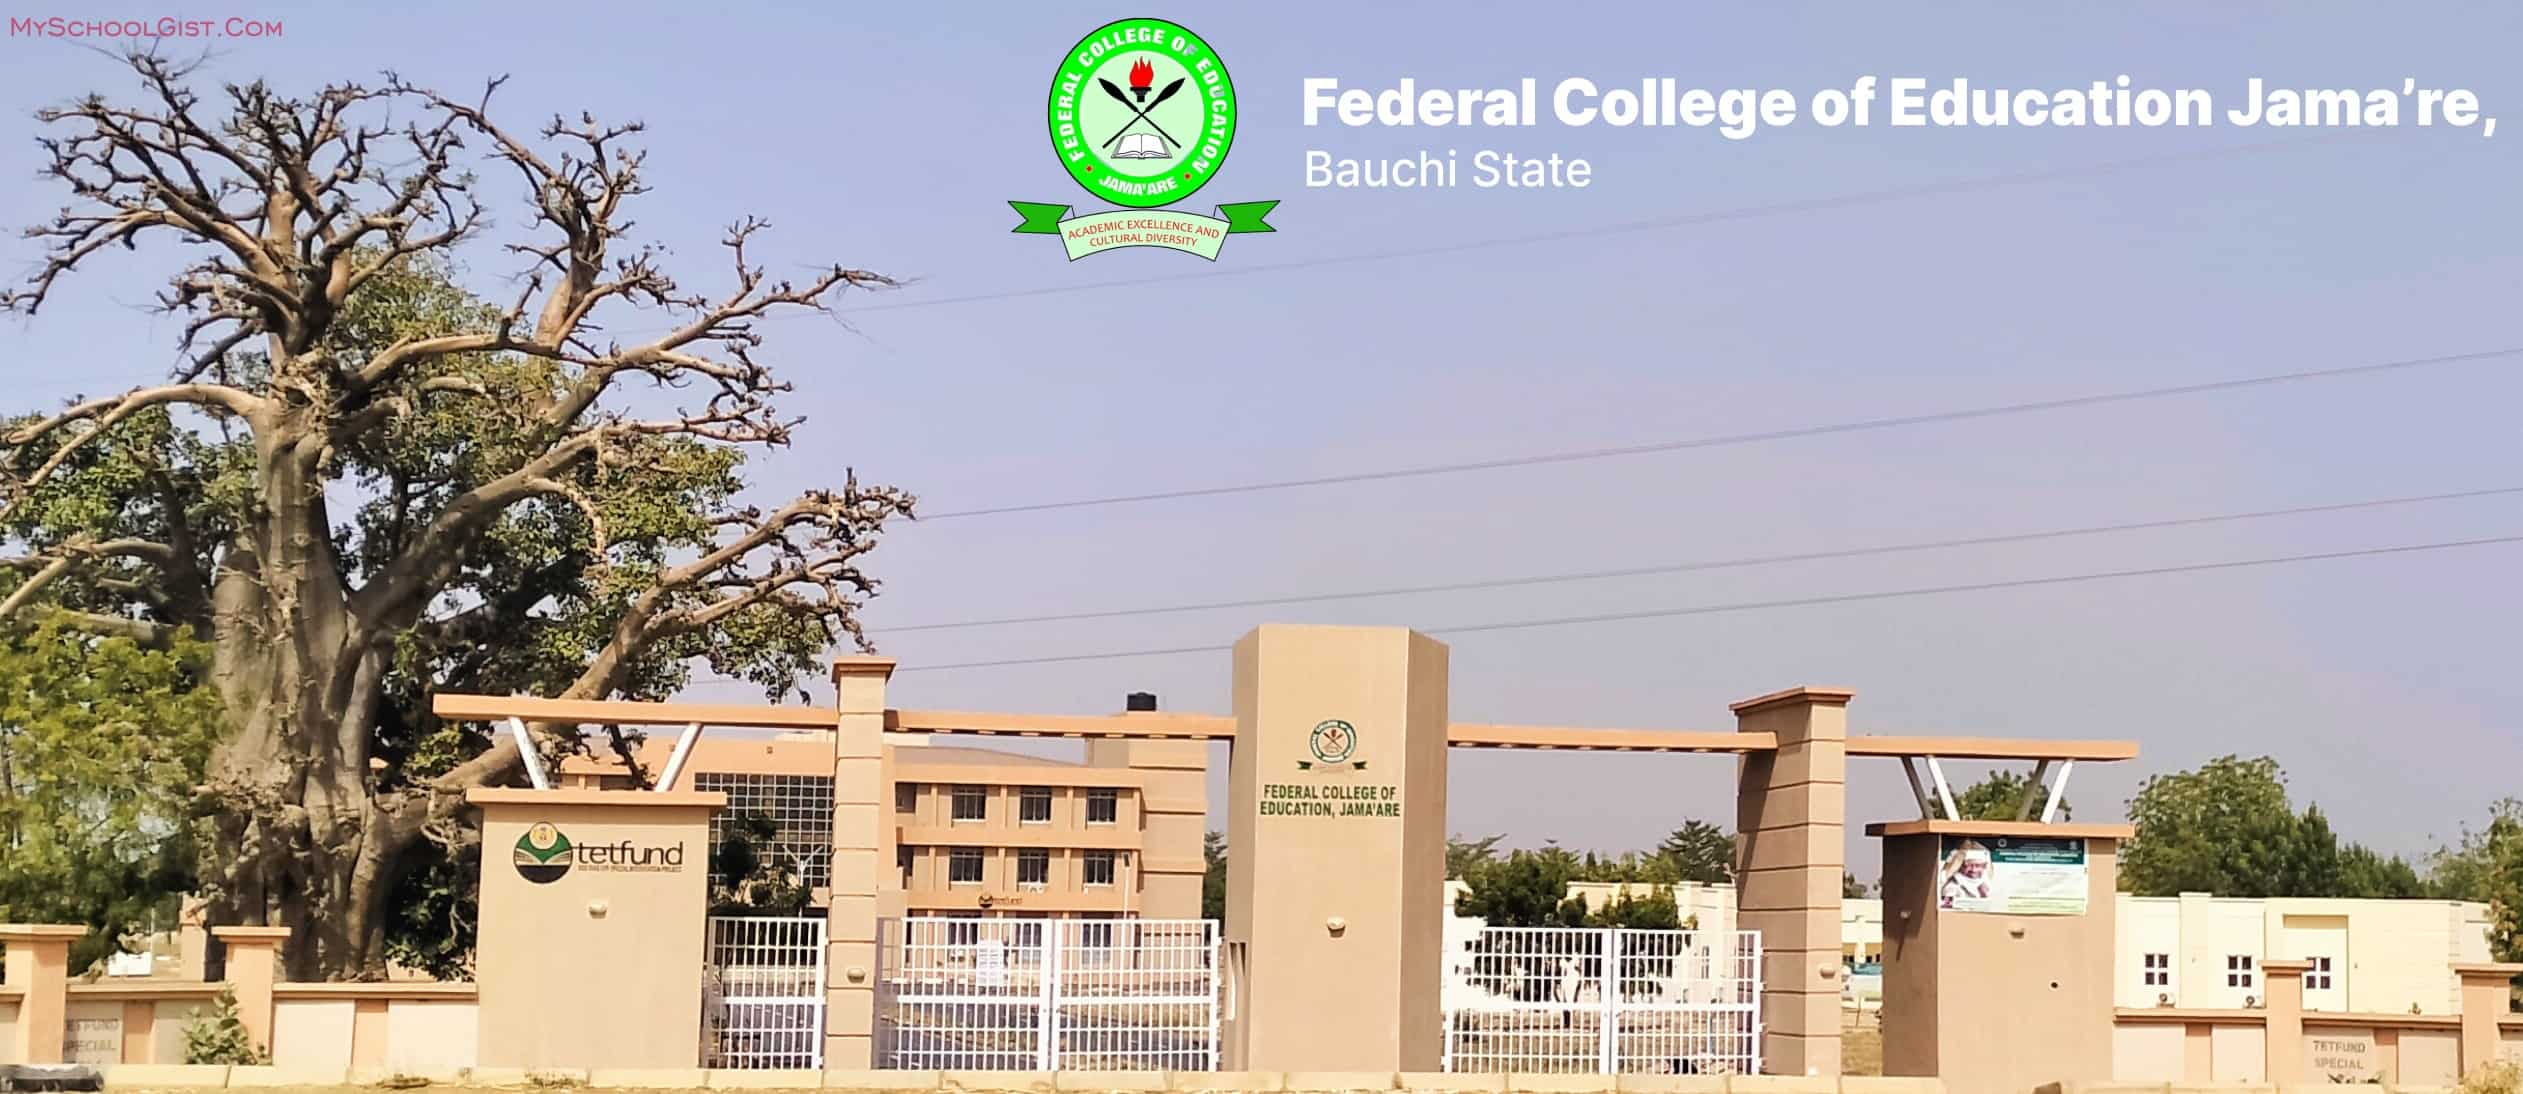 Federal College of Education Jama'are Maiden Matriculation Ceremony